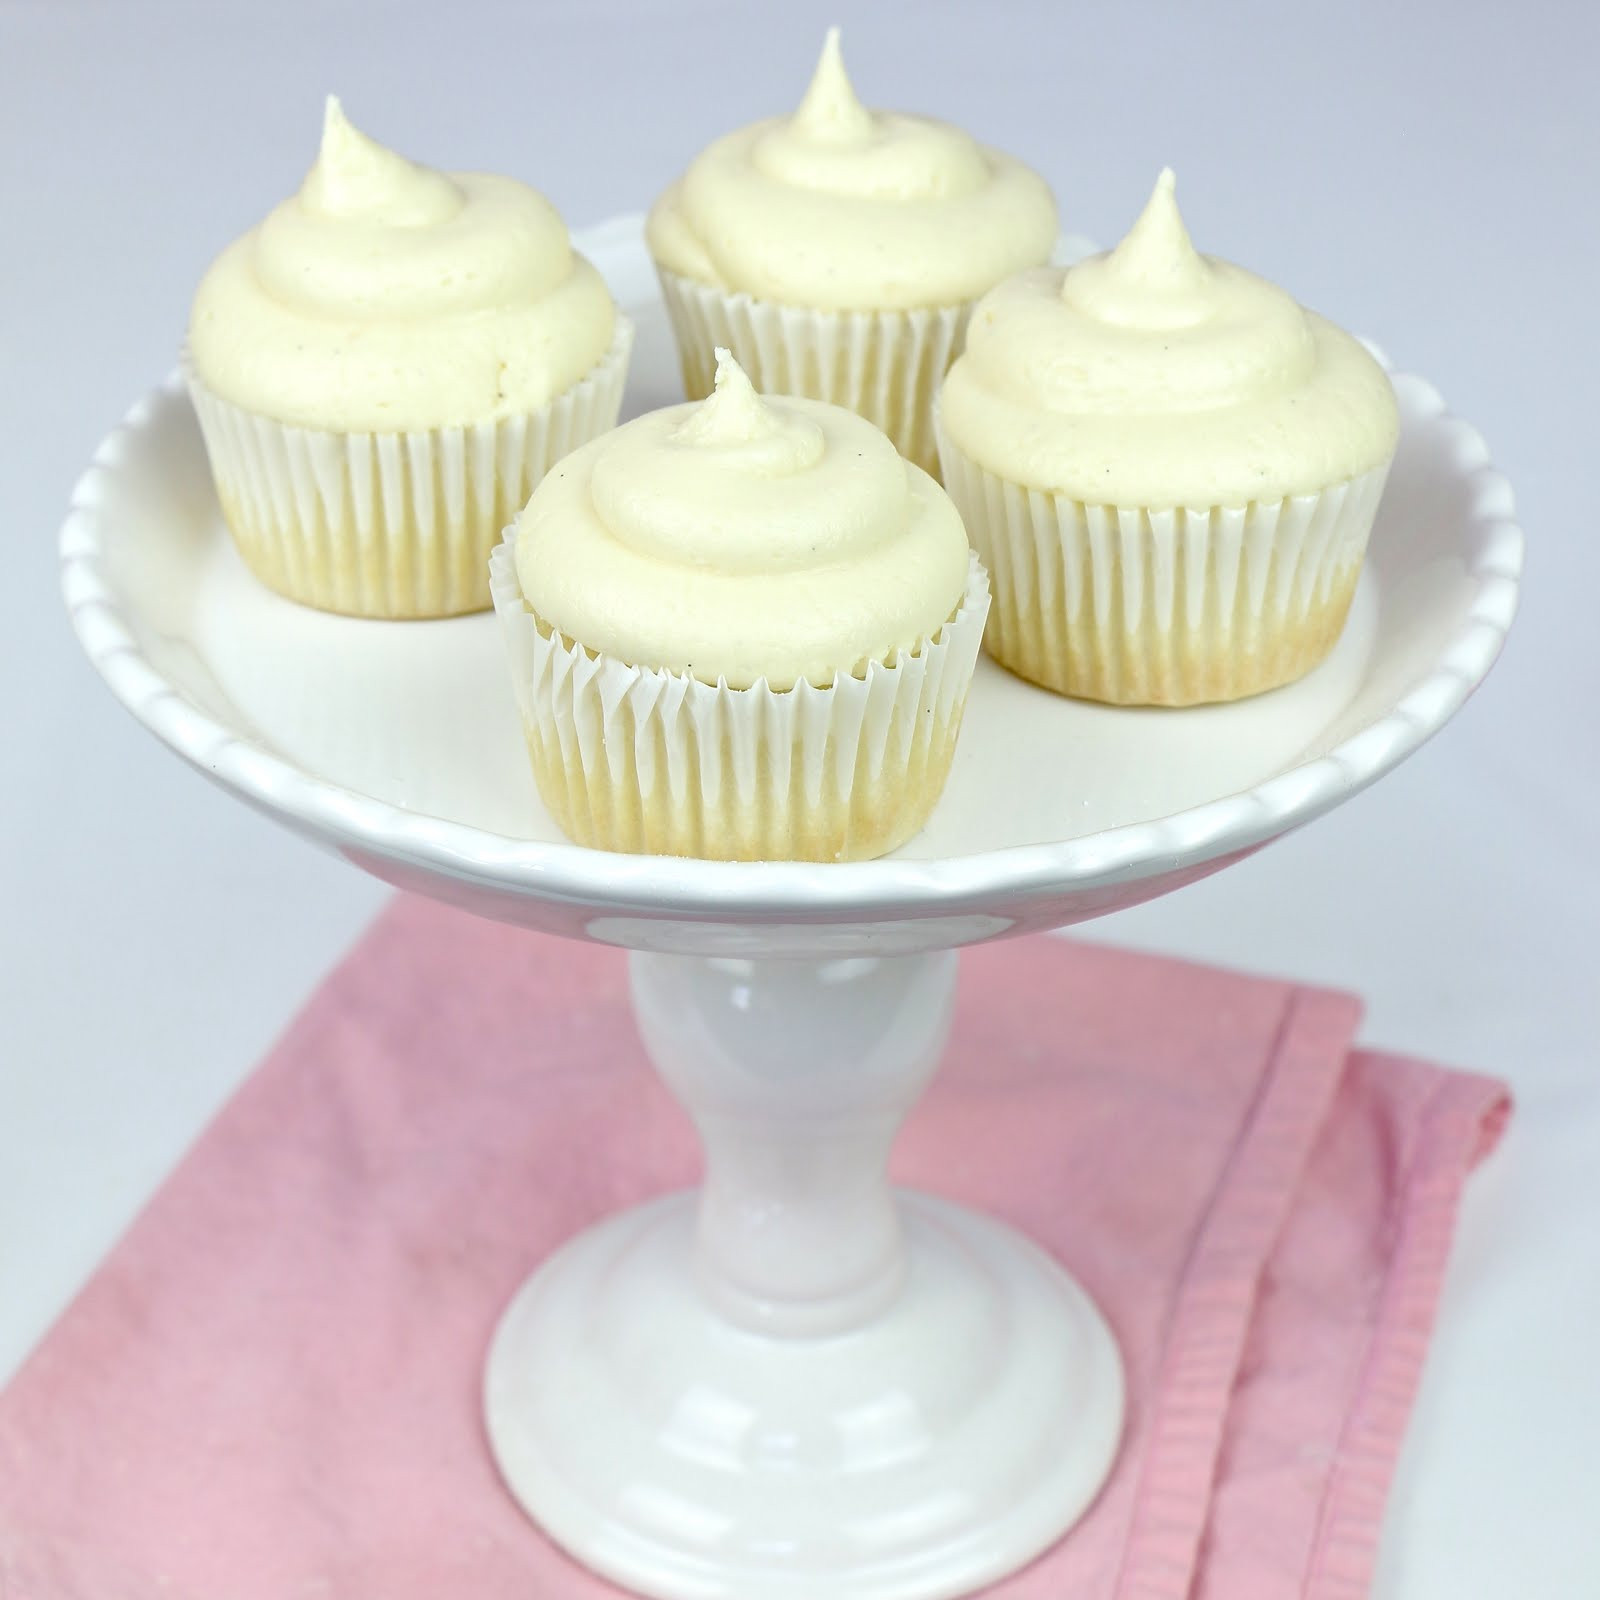 Gourmet Super Moist Vanilla Cupcakes Recipes
 VIDEO THE BEST Vanilla Cupcakes from Scratch Lindsay